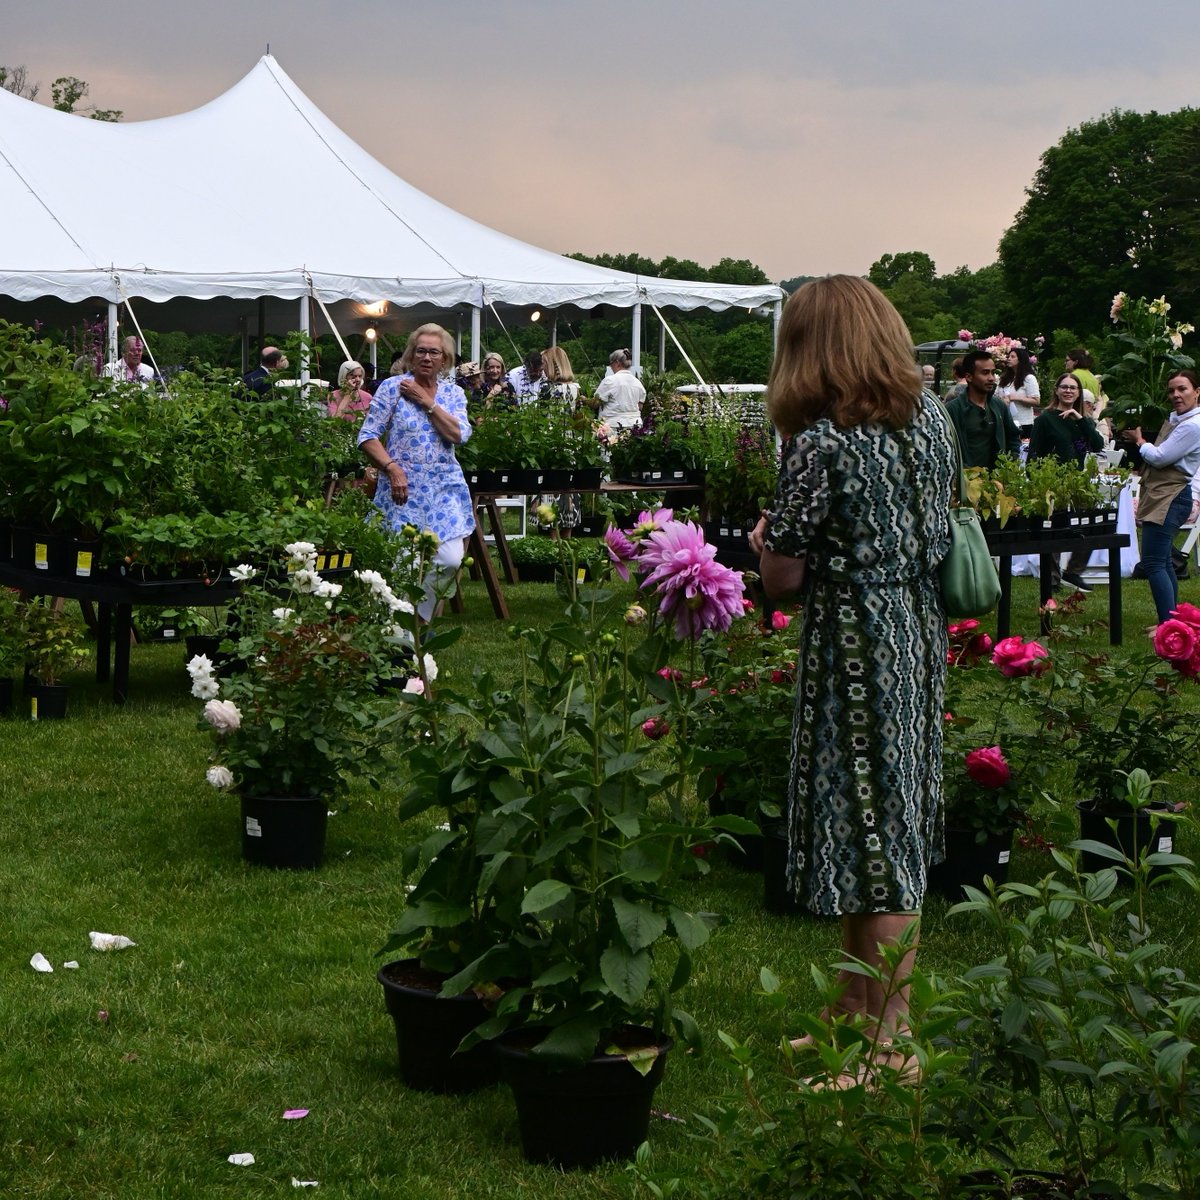 Get ready to immerse yourself in the wonderful world of gardening at @oldwestburygardens fourth annual Garden Days event! 🌺#discoverlongisland From May 30th to June 2nd, celebrate the beauty of nature with a plant sale, music, & more!☀️🌿📸: @trishajay_photography